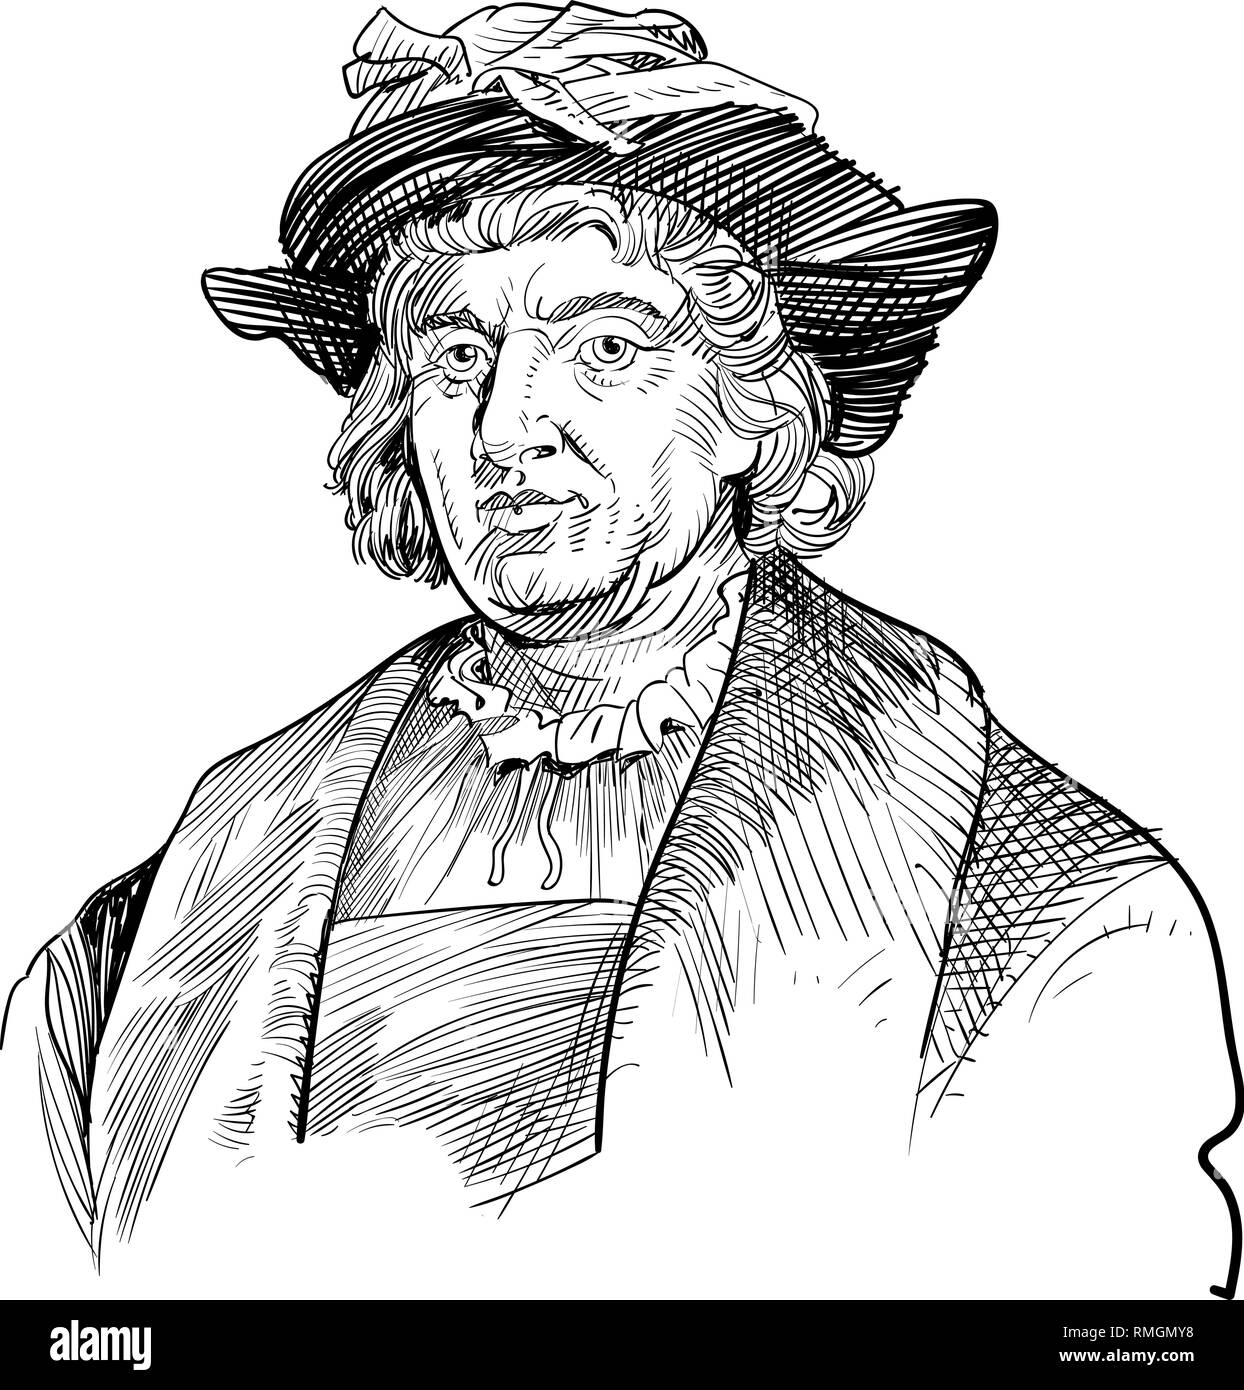 Christopher Columbus portrait in line art illustration. He was an Italian explorer, colonizer, navigator and the discoverer of the America continent. Stock Vector